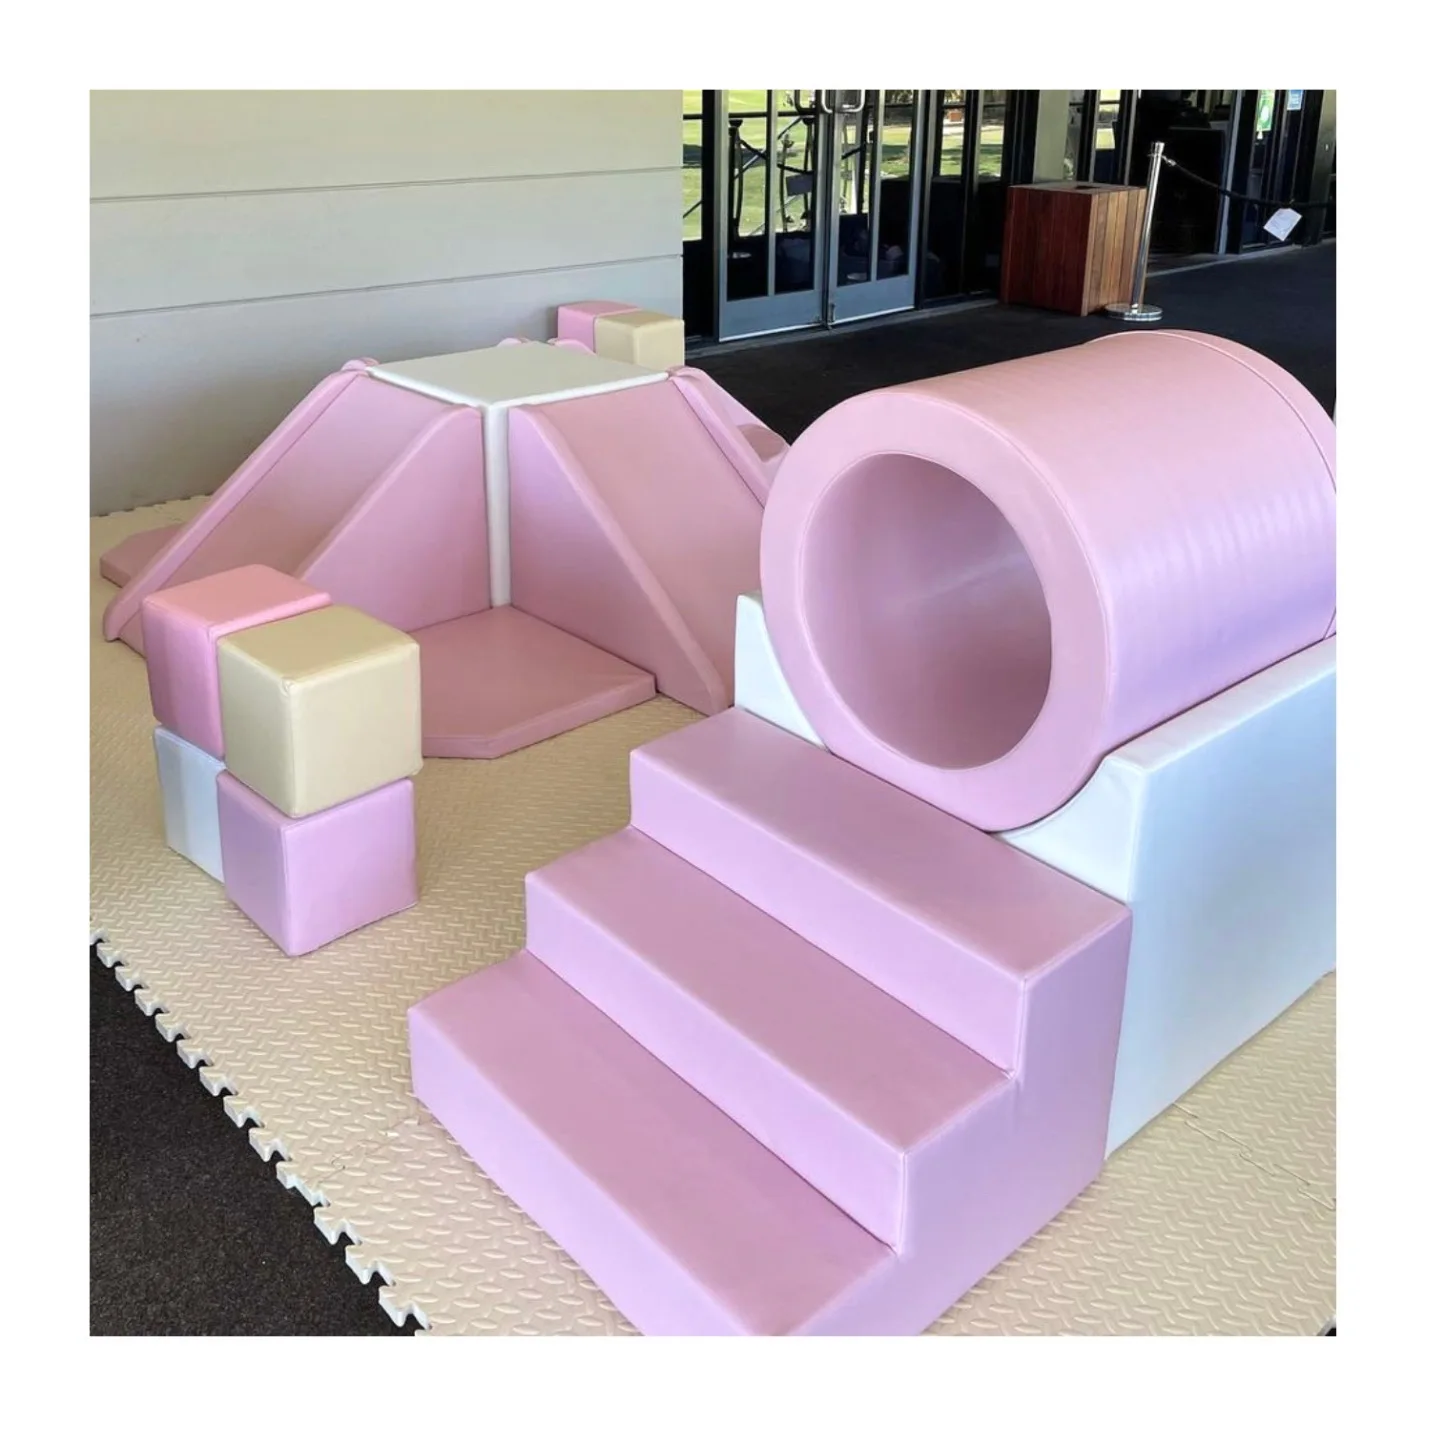 SOFT PLAY PACKAGE